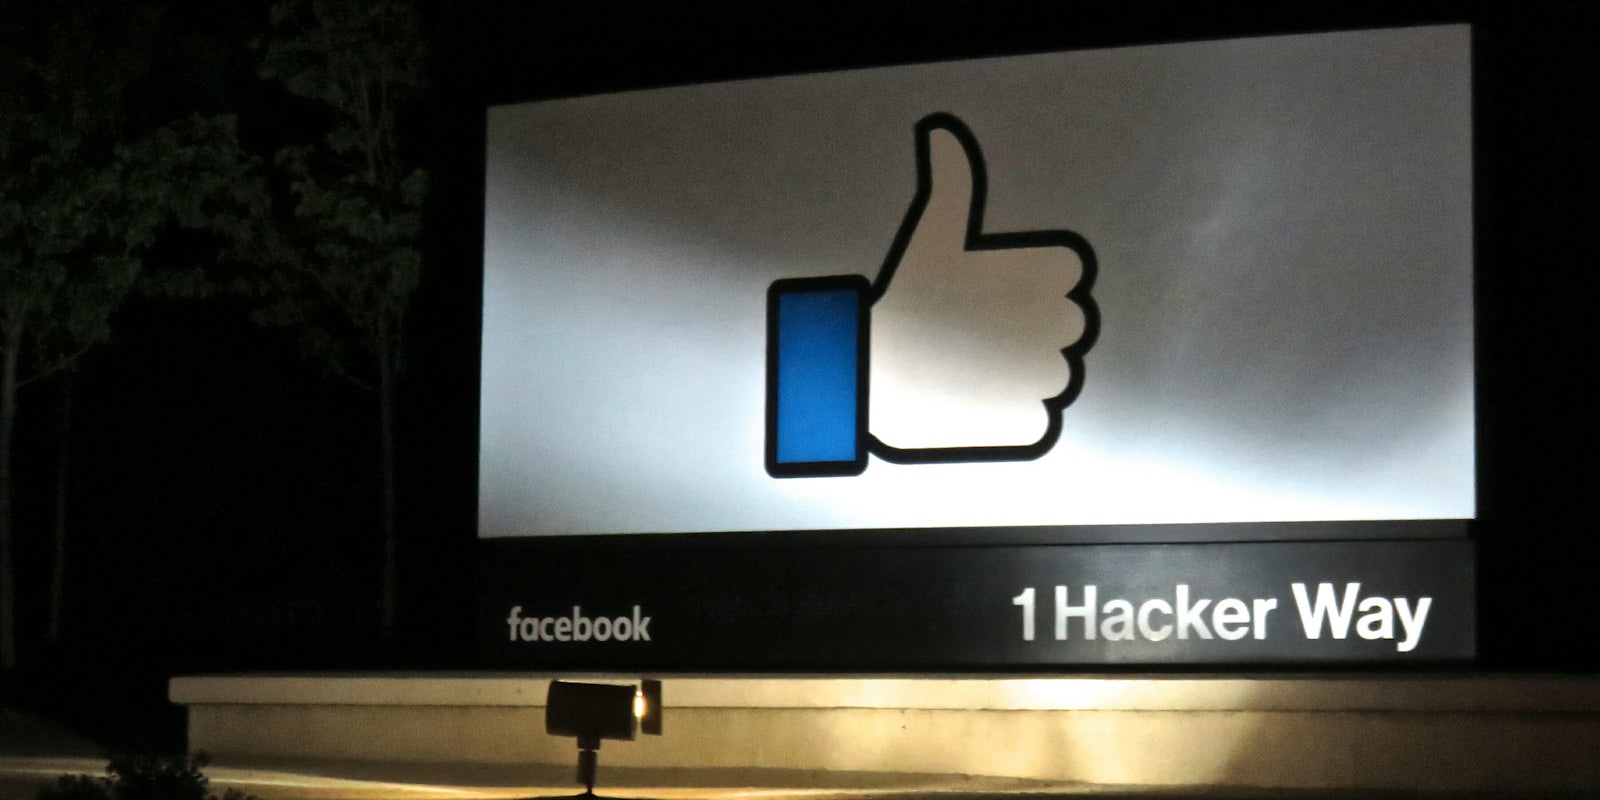 Facebook headquarters' official sign.